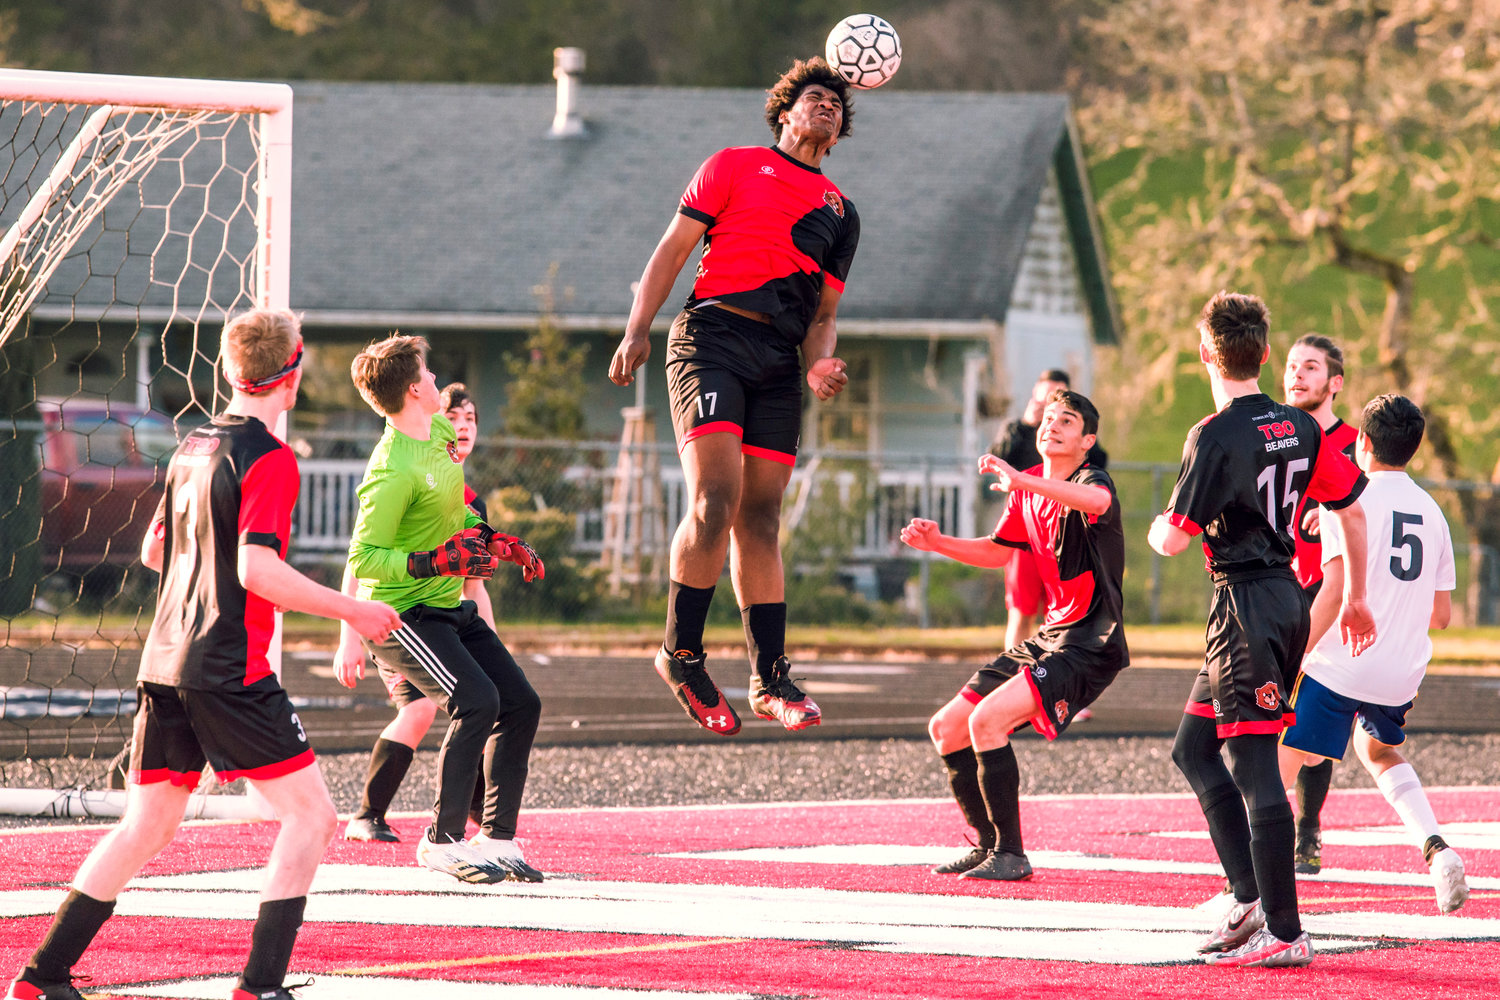 Tenino's Takari Hickle (17) makes a header during a game against Forks on Friday at Beaver Stadium.